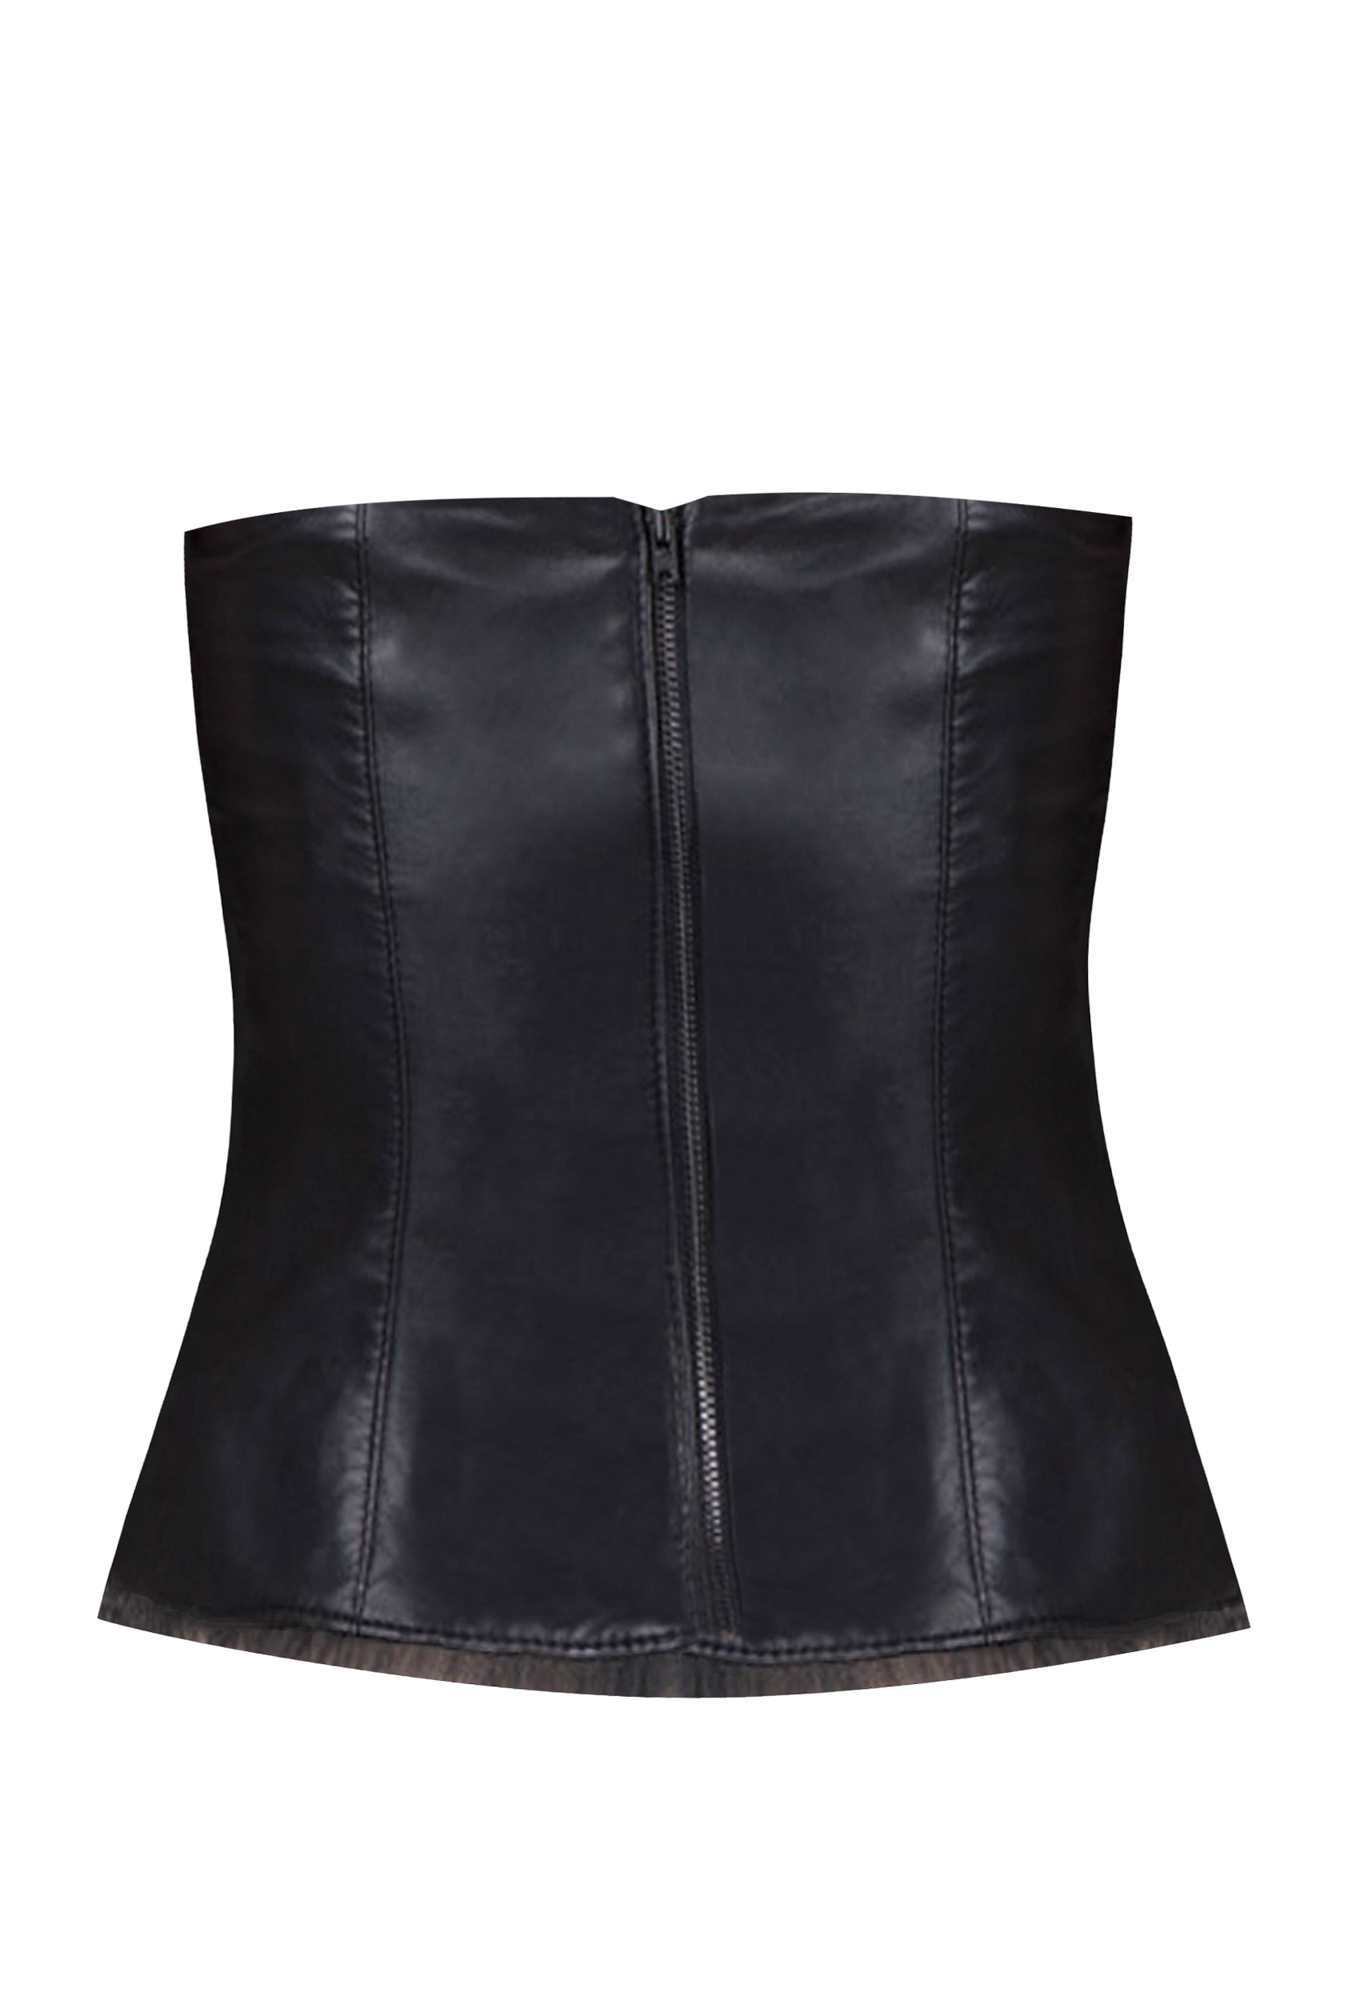 219002 LEATHER CORSET BLACK - By Rieske image 4